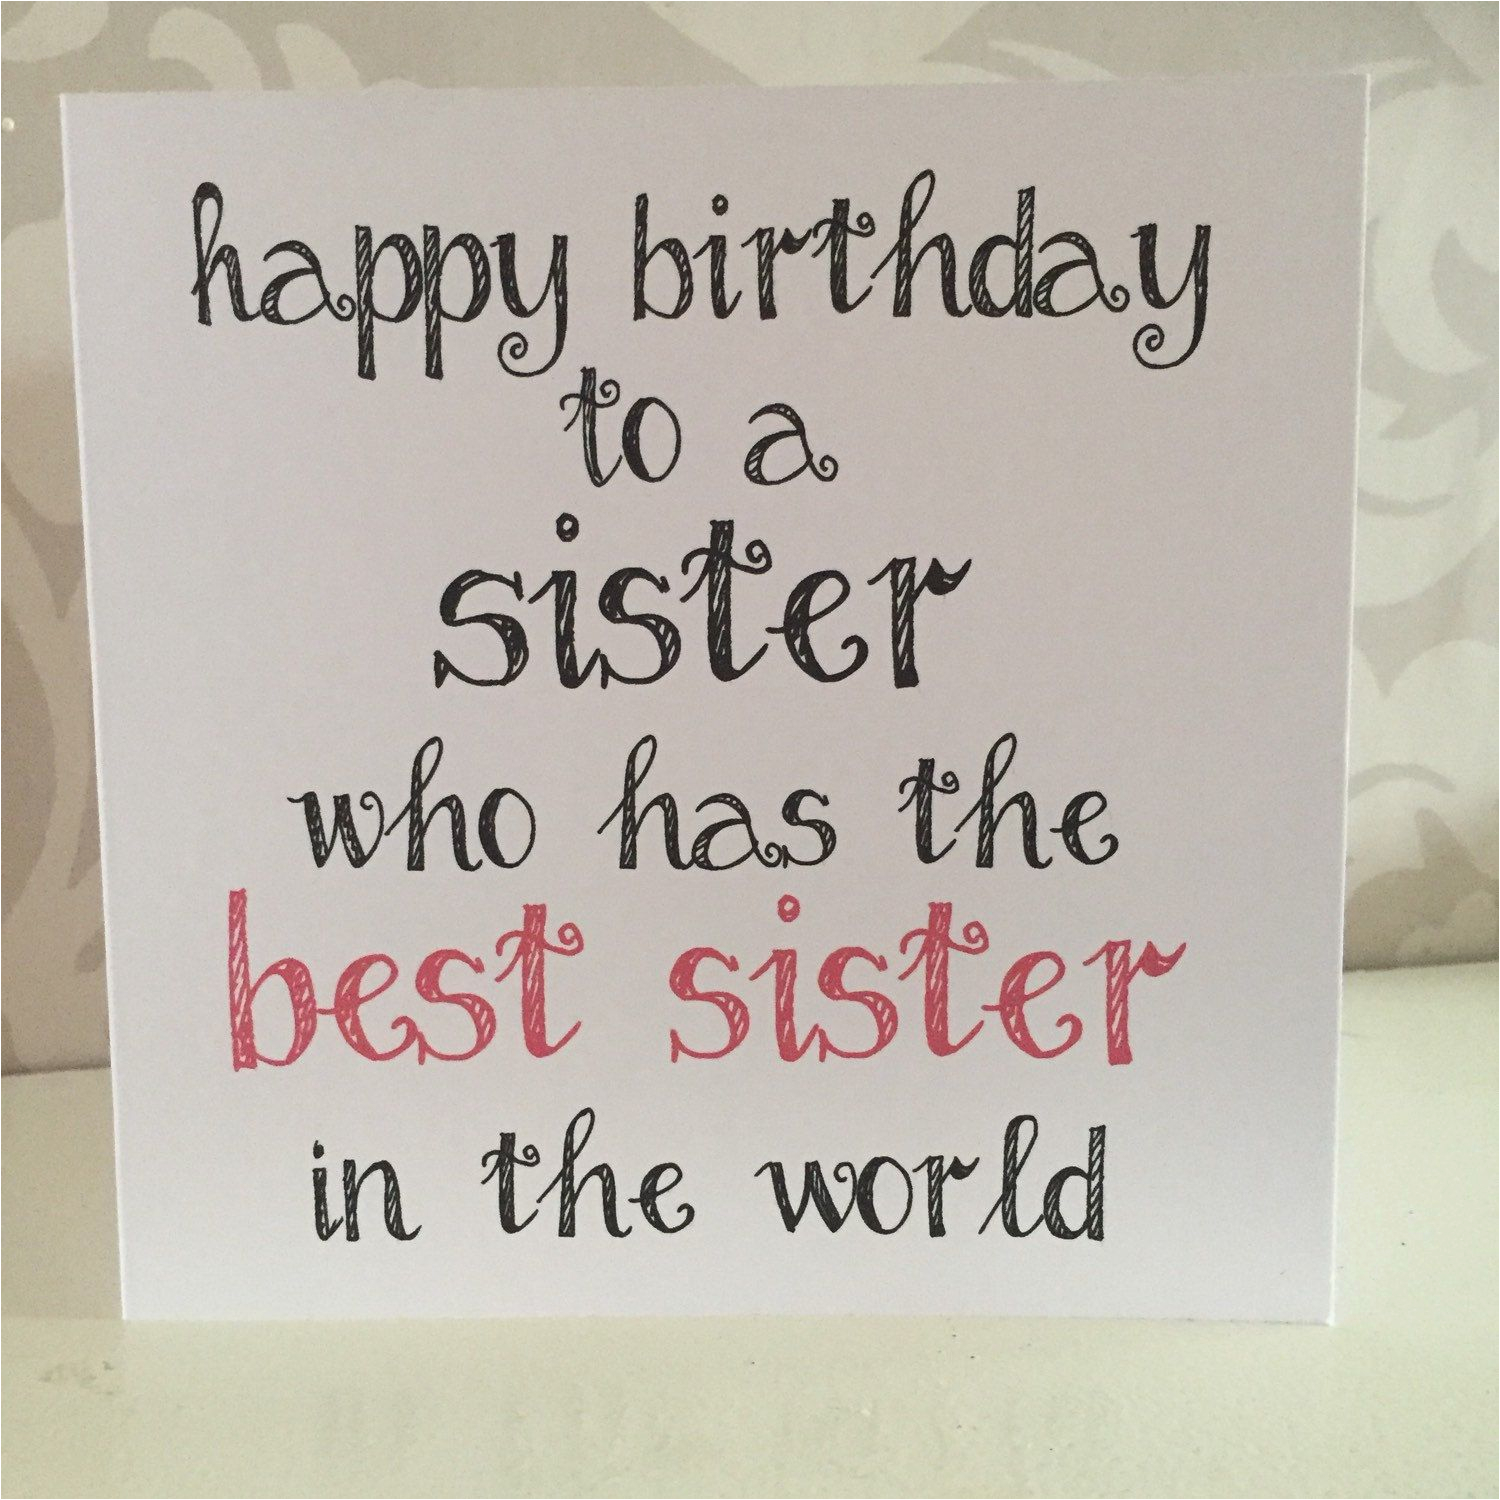 Funny Birthday Card Messages for Sister Sending This Out today Quotes ...